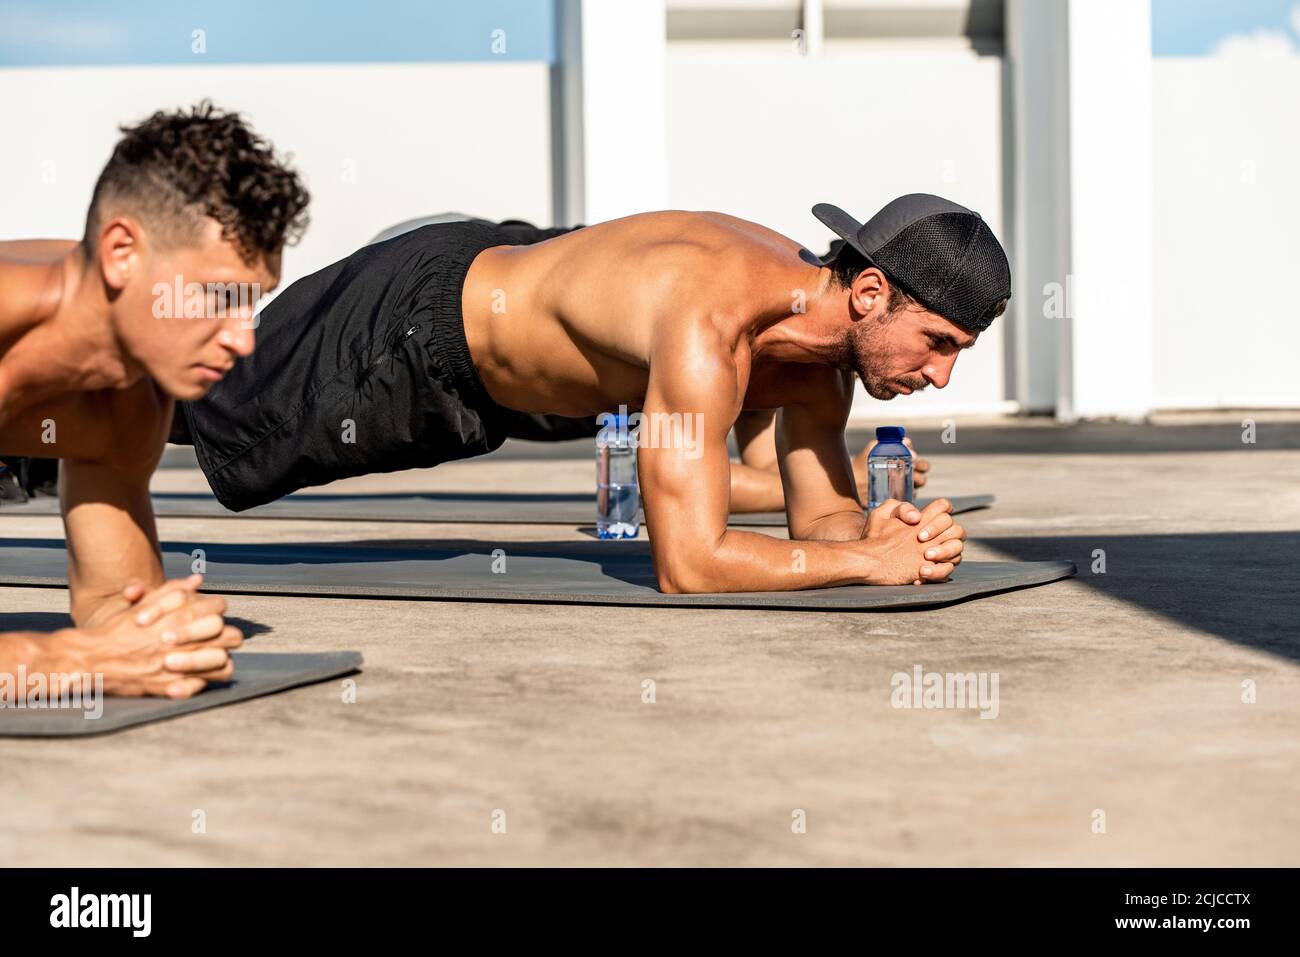 Group of athletic men doing plank morning workout exercise outdoors on rooftop floor Stock Photo